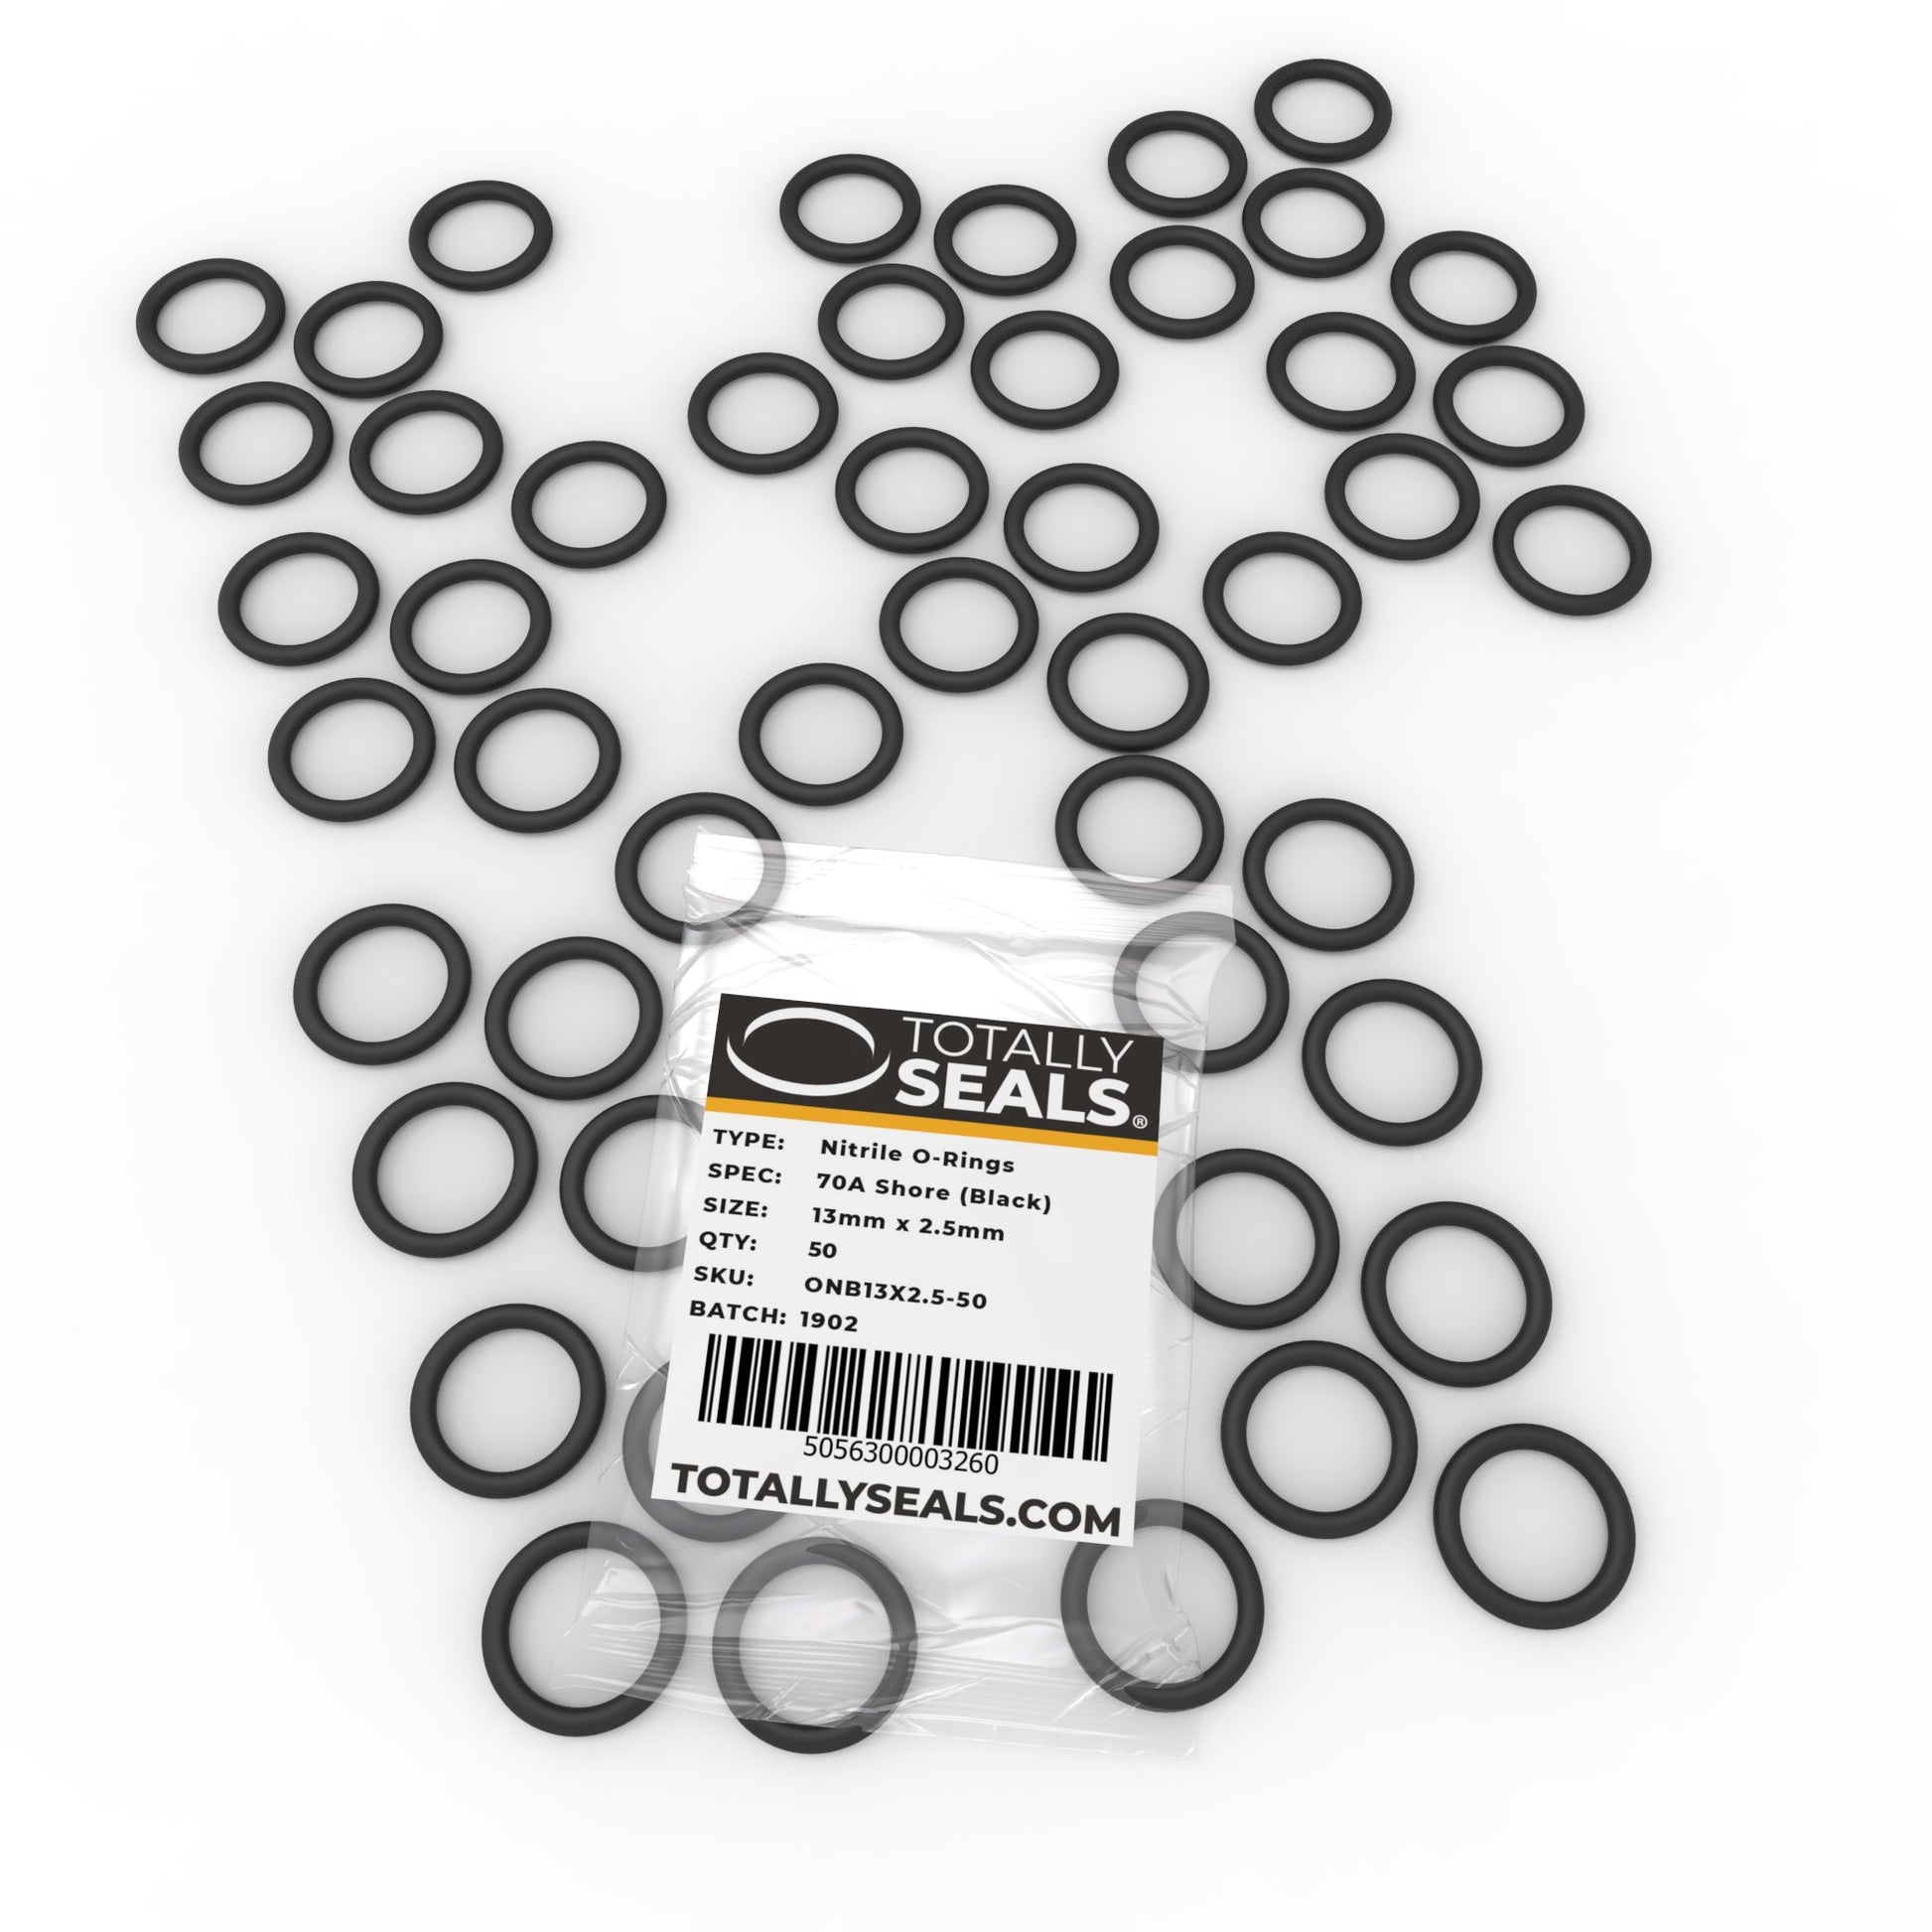 13mm x 2.5mm (18mm OD) Nitrile O-Rings - Totally Seals®